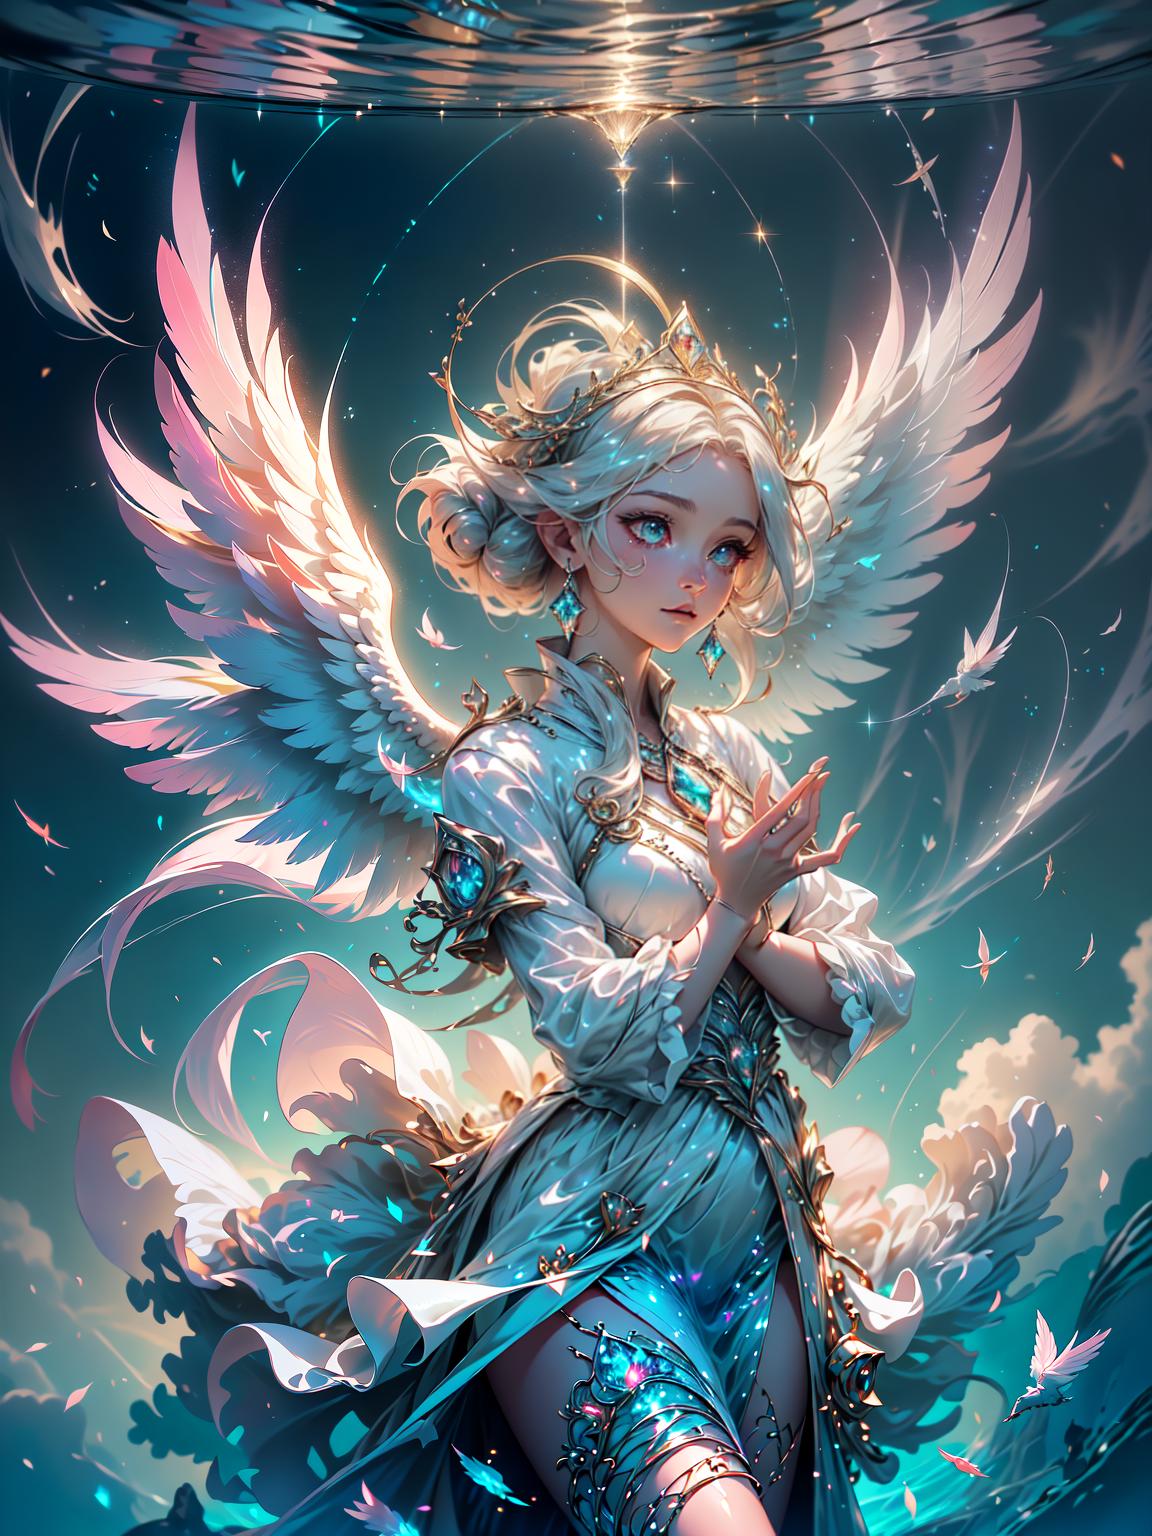  master piece, best quality, ultra detailed, highres, 4k.8k, Angel., Posing, Radiating light, Holding a holy symbol, Standing gracefully., Serene and peaceful., BREAK A beautiful angel emitting divine light., Heavenly realm., Holy symbol, Clouds, Shining halo, Feathered wings., BREAK Ethereal and tranquil., Radiant glow, Soft ethereal lighting, Feathery light effects, Heavenly aura., crystallineAI,fantasy00d